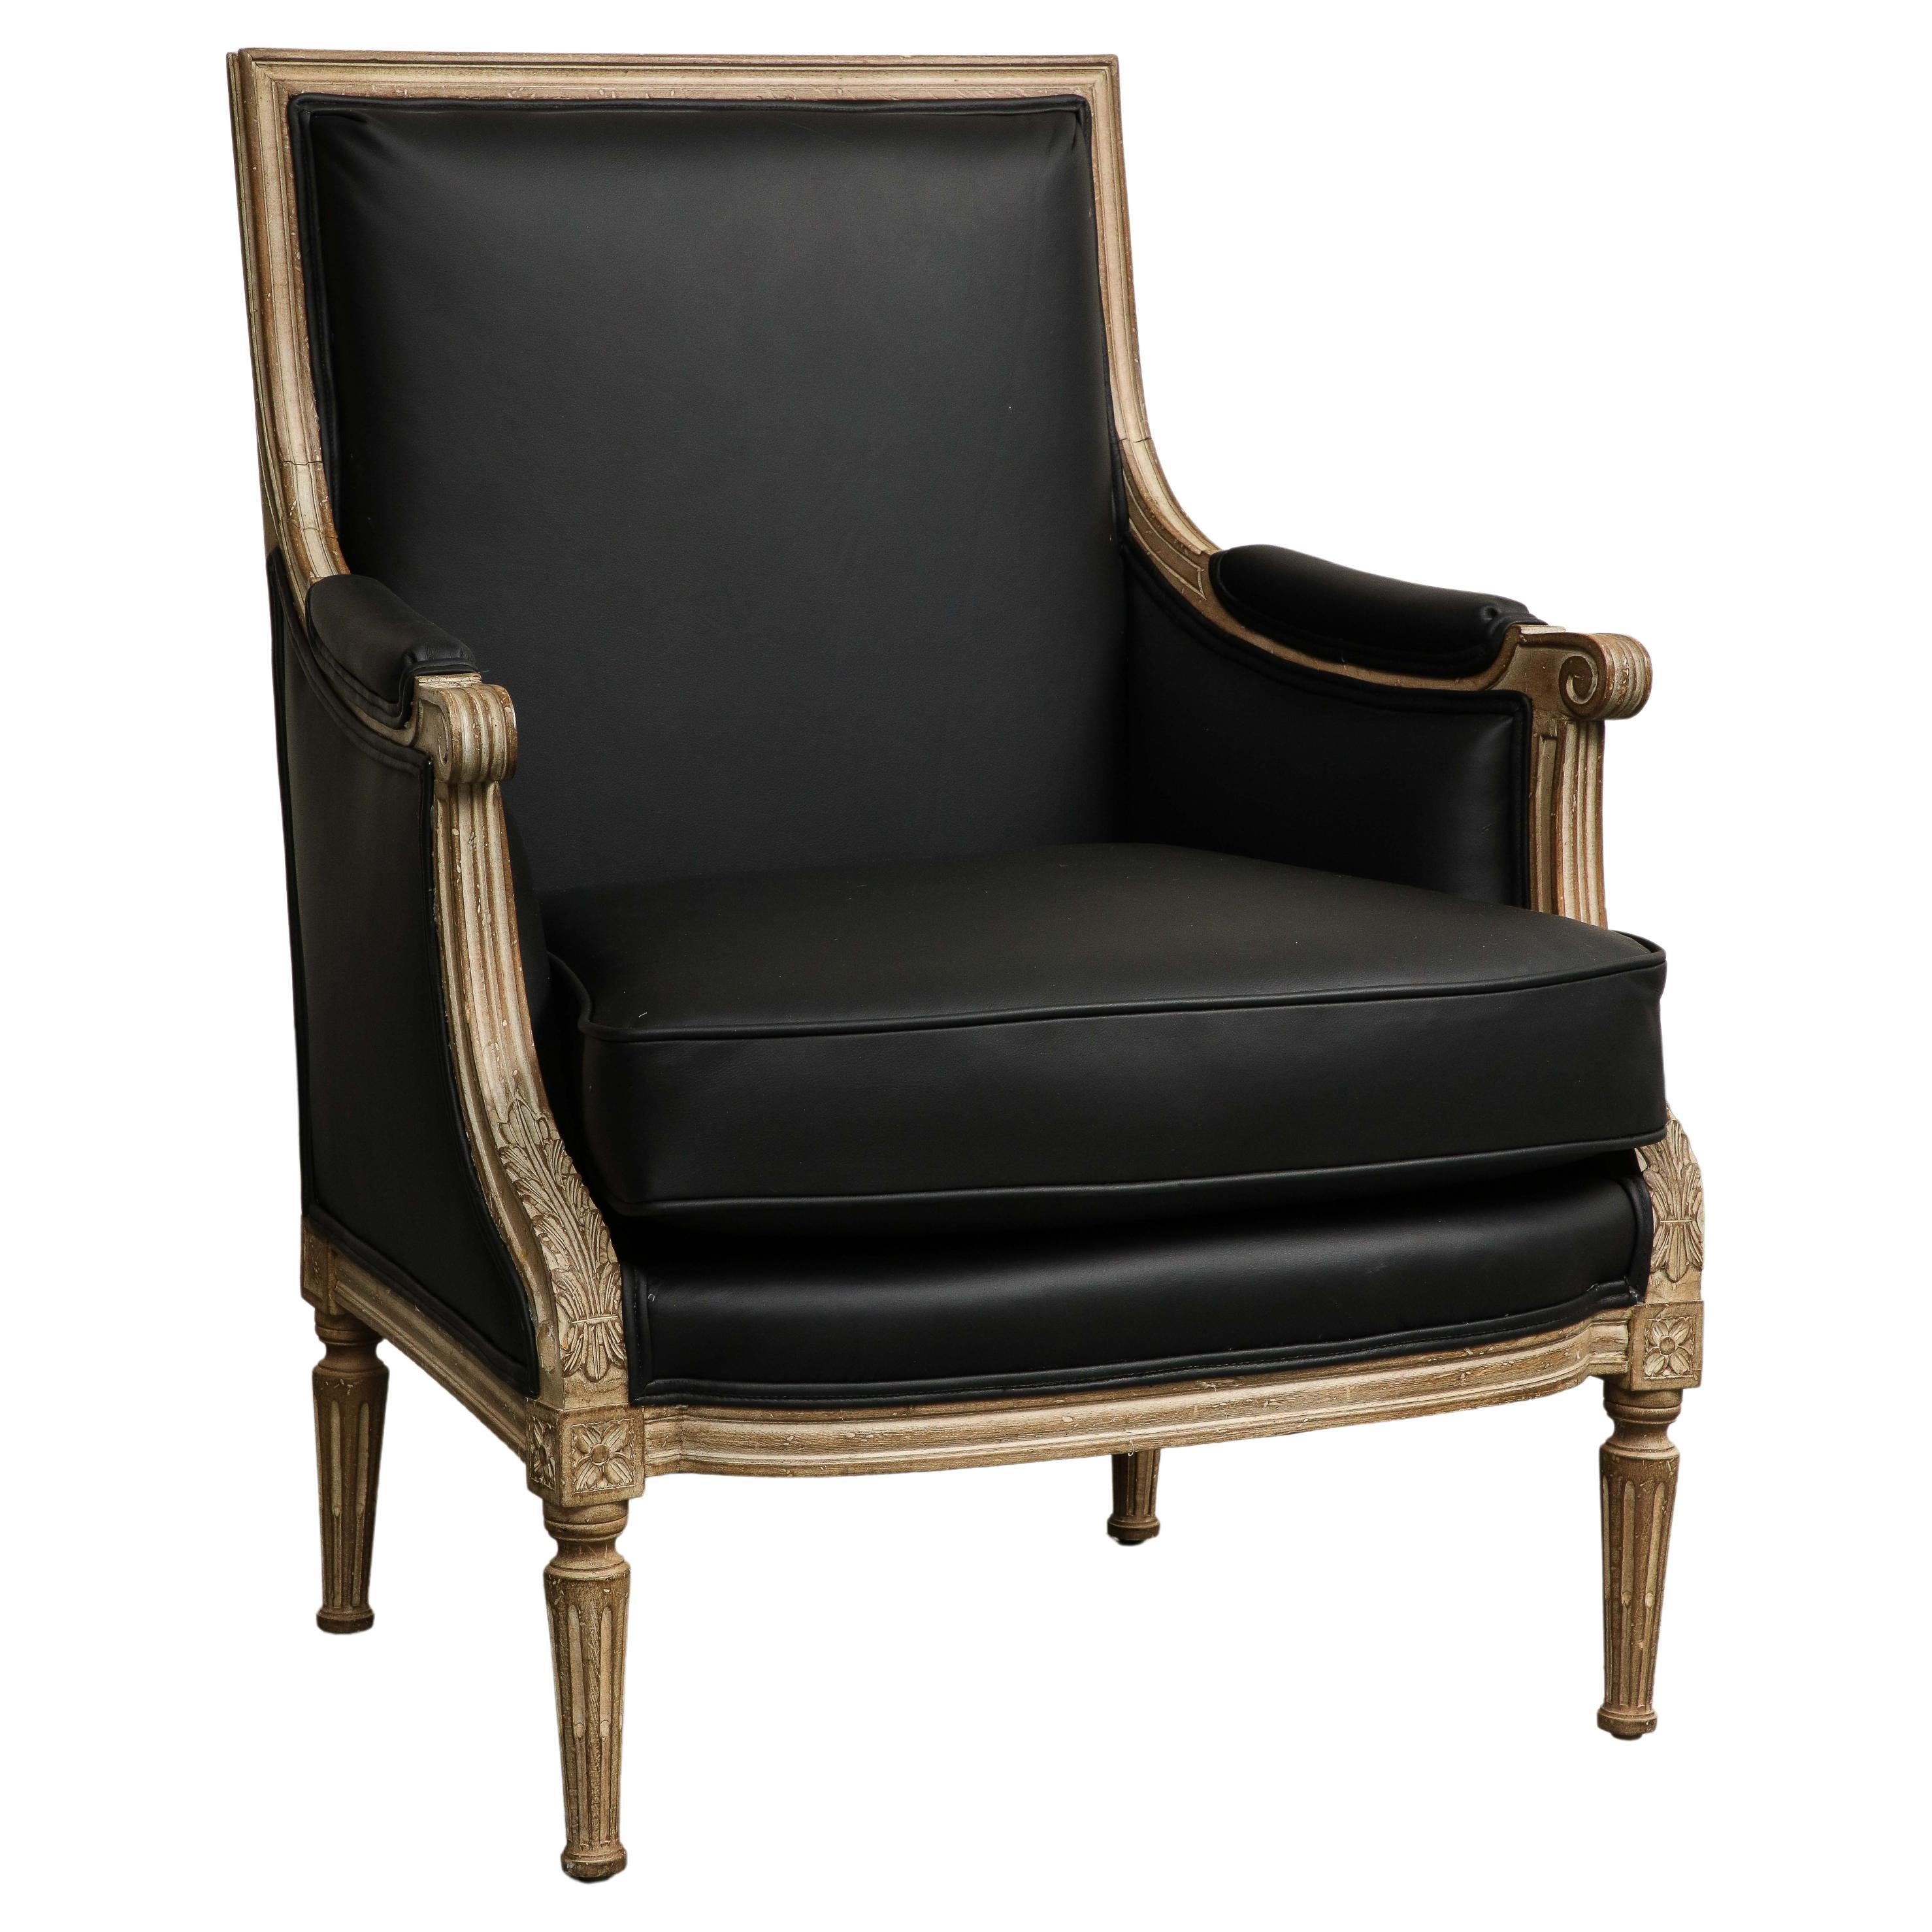 19th Century French Louis XVI Style Black Leather Painted Bergère Armchair